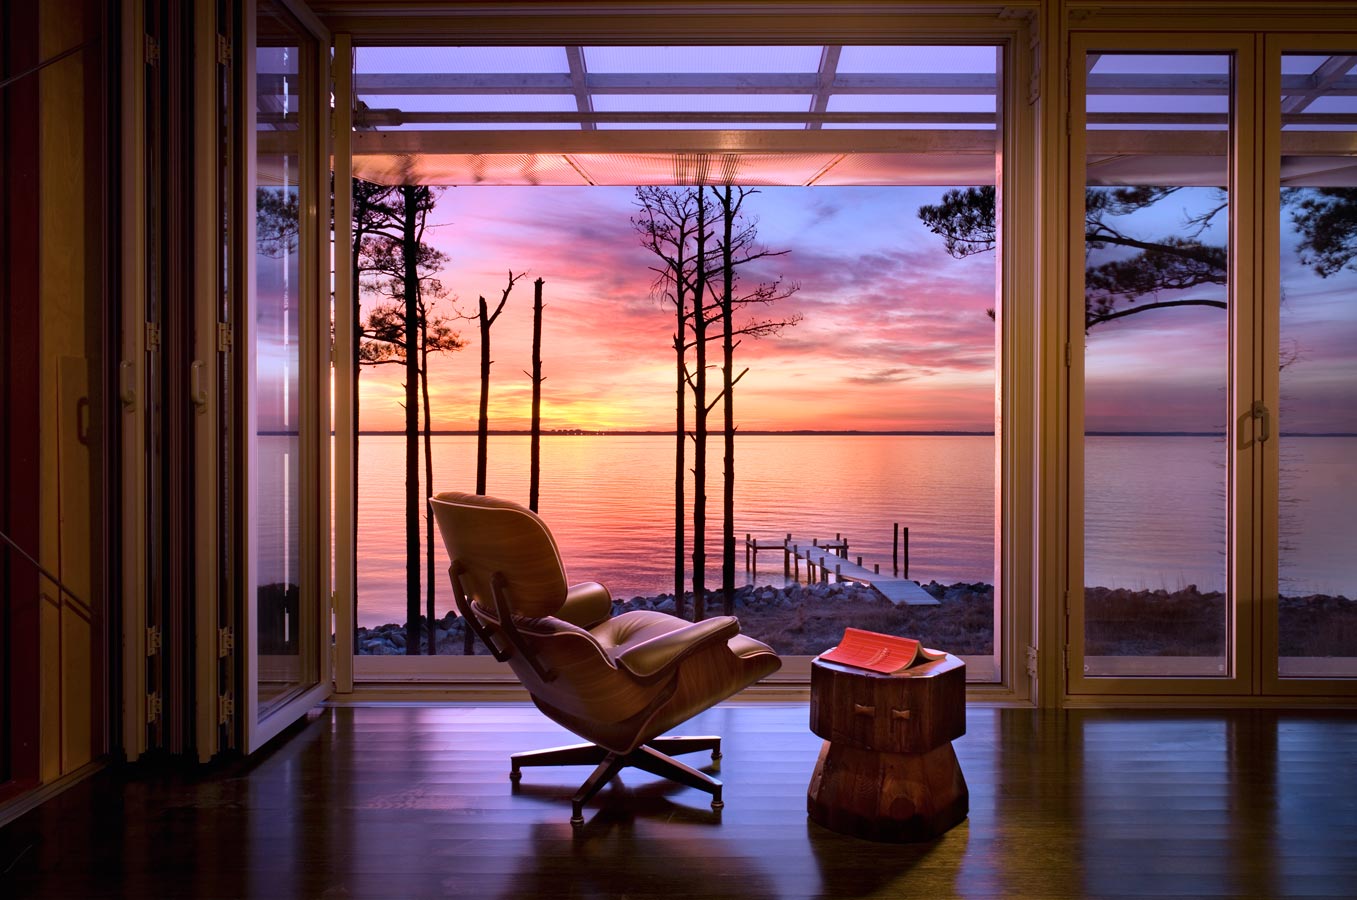 <p>A view from the interior of the house overlooking the Chesapeake Bay at sunset. <br><small>&copy; Peter Aaron/OTTO</small></p>